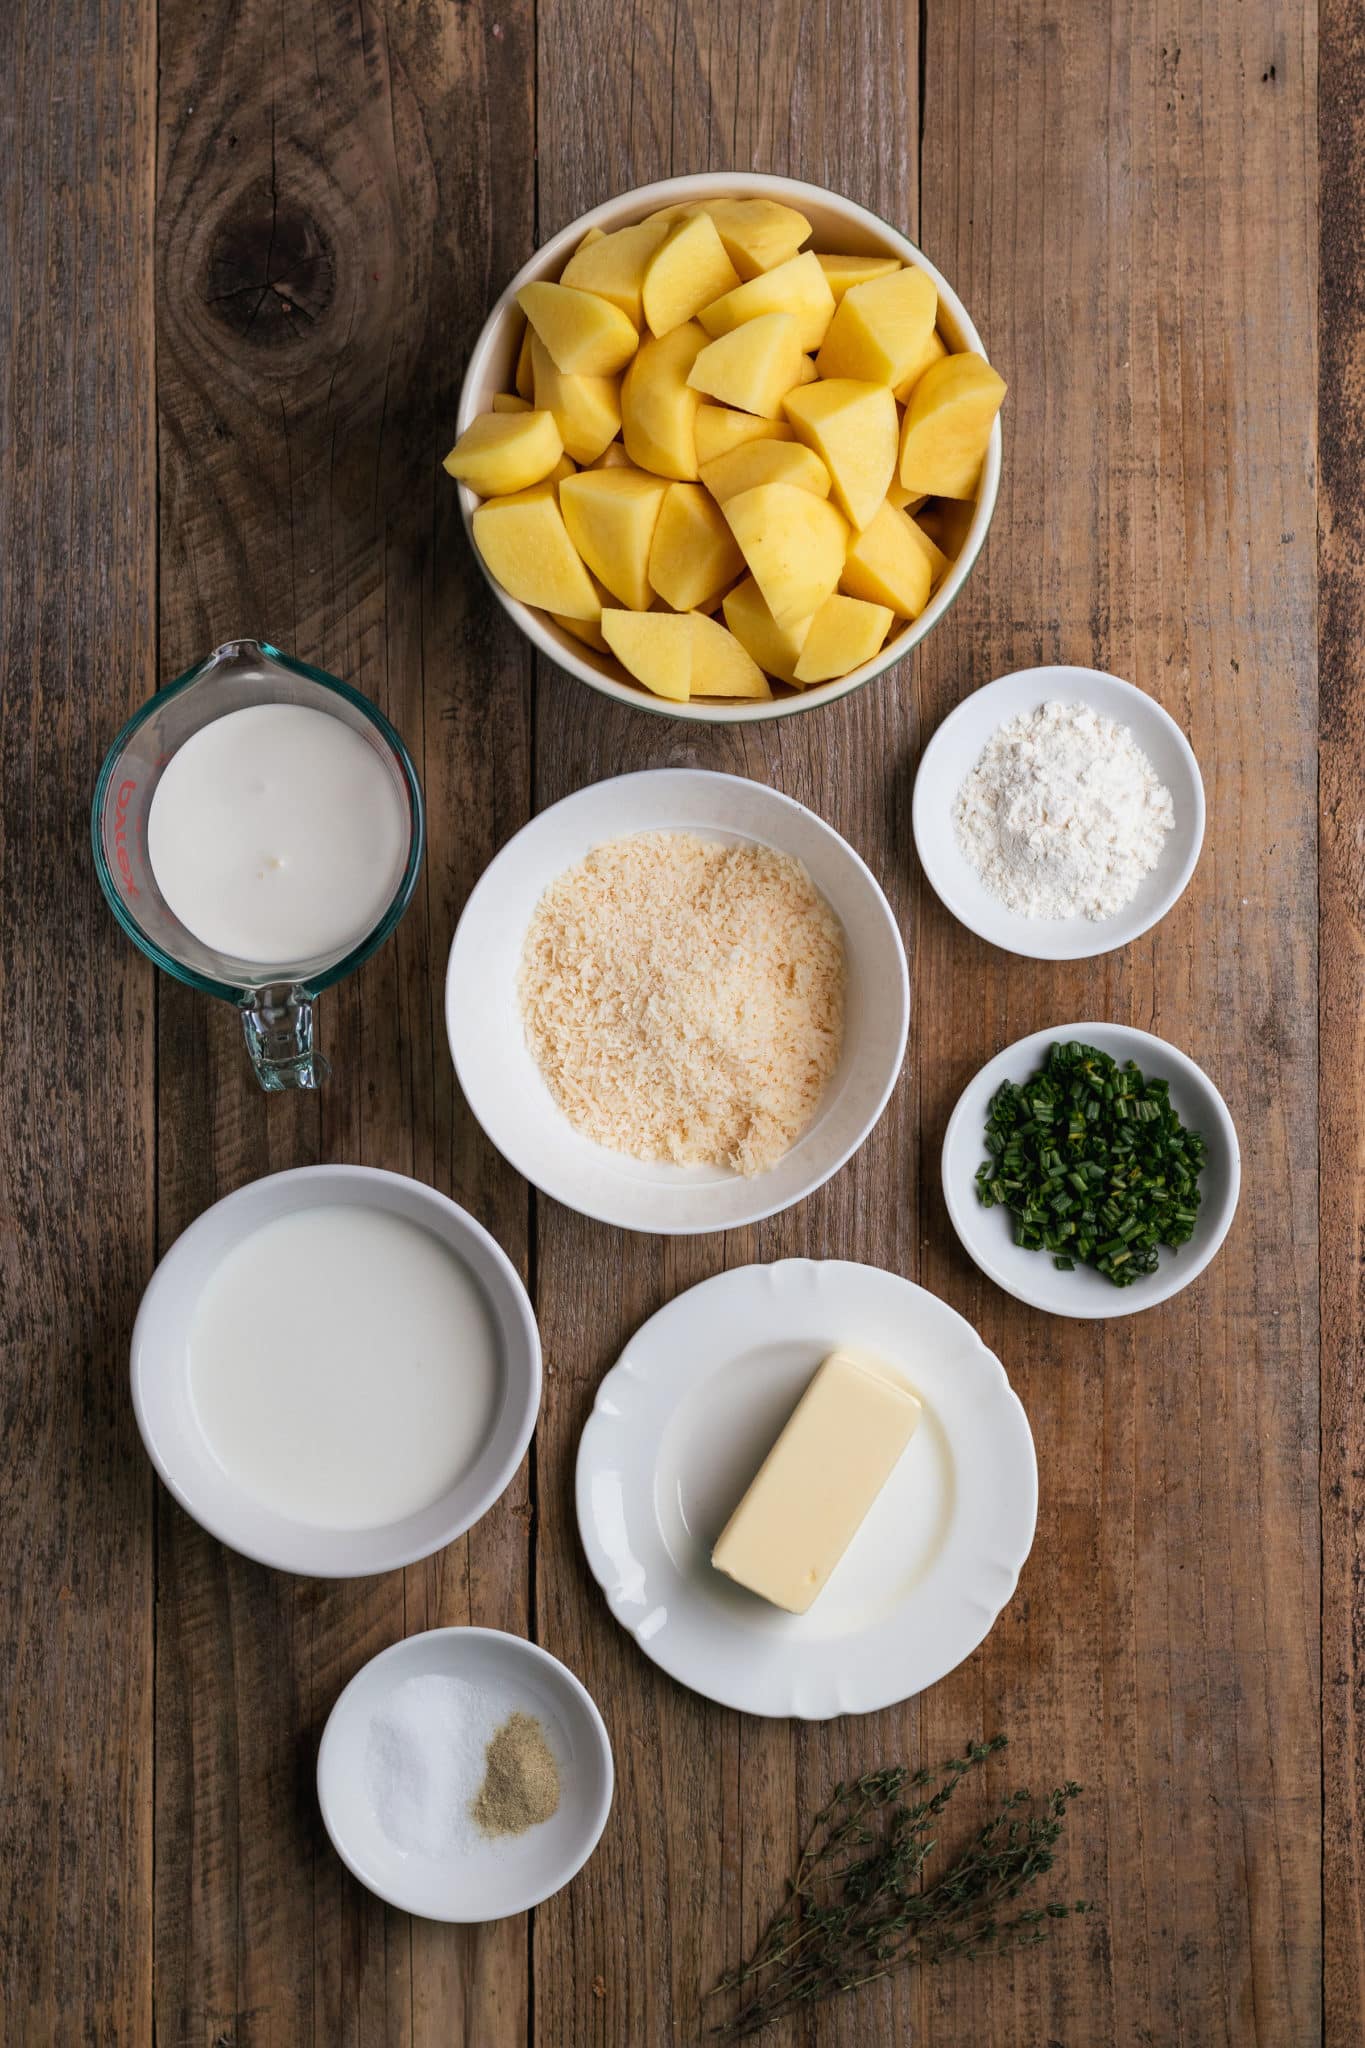 ingredients for potatoes in small white bowls.